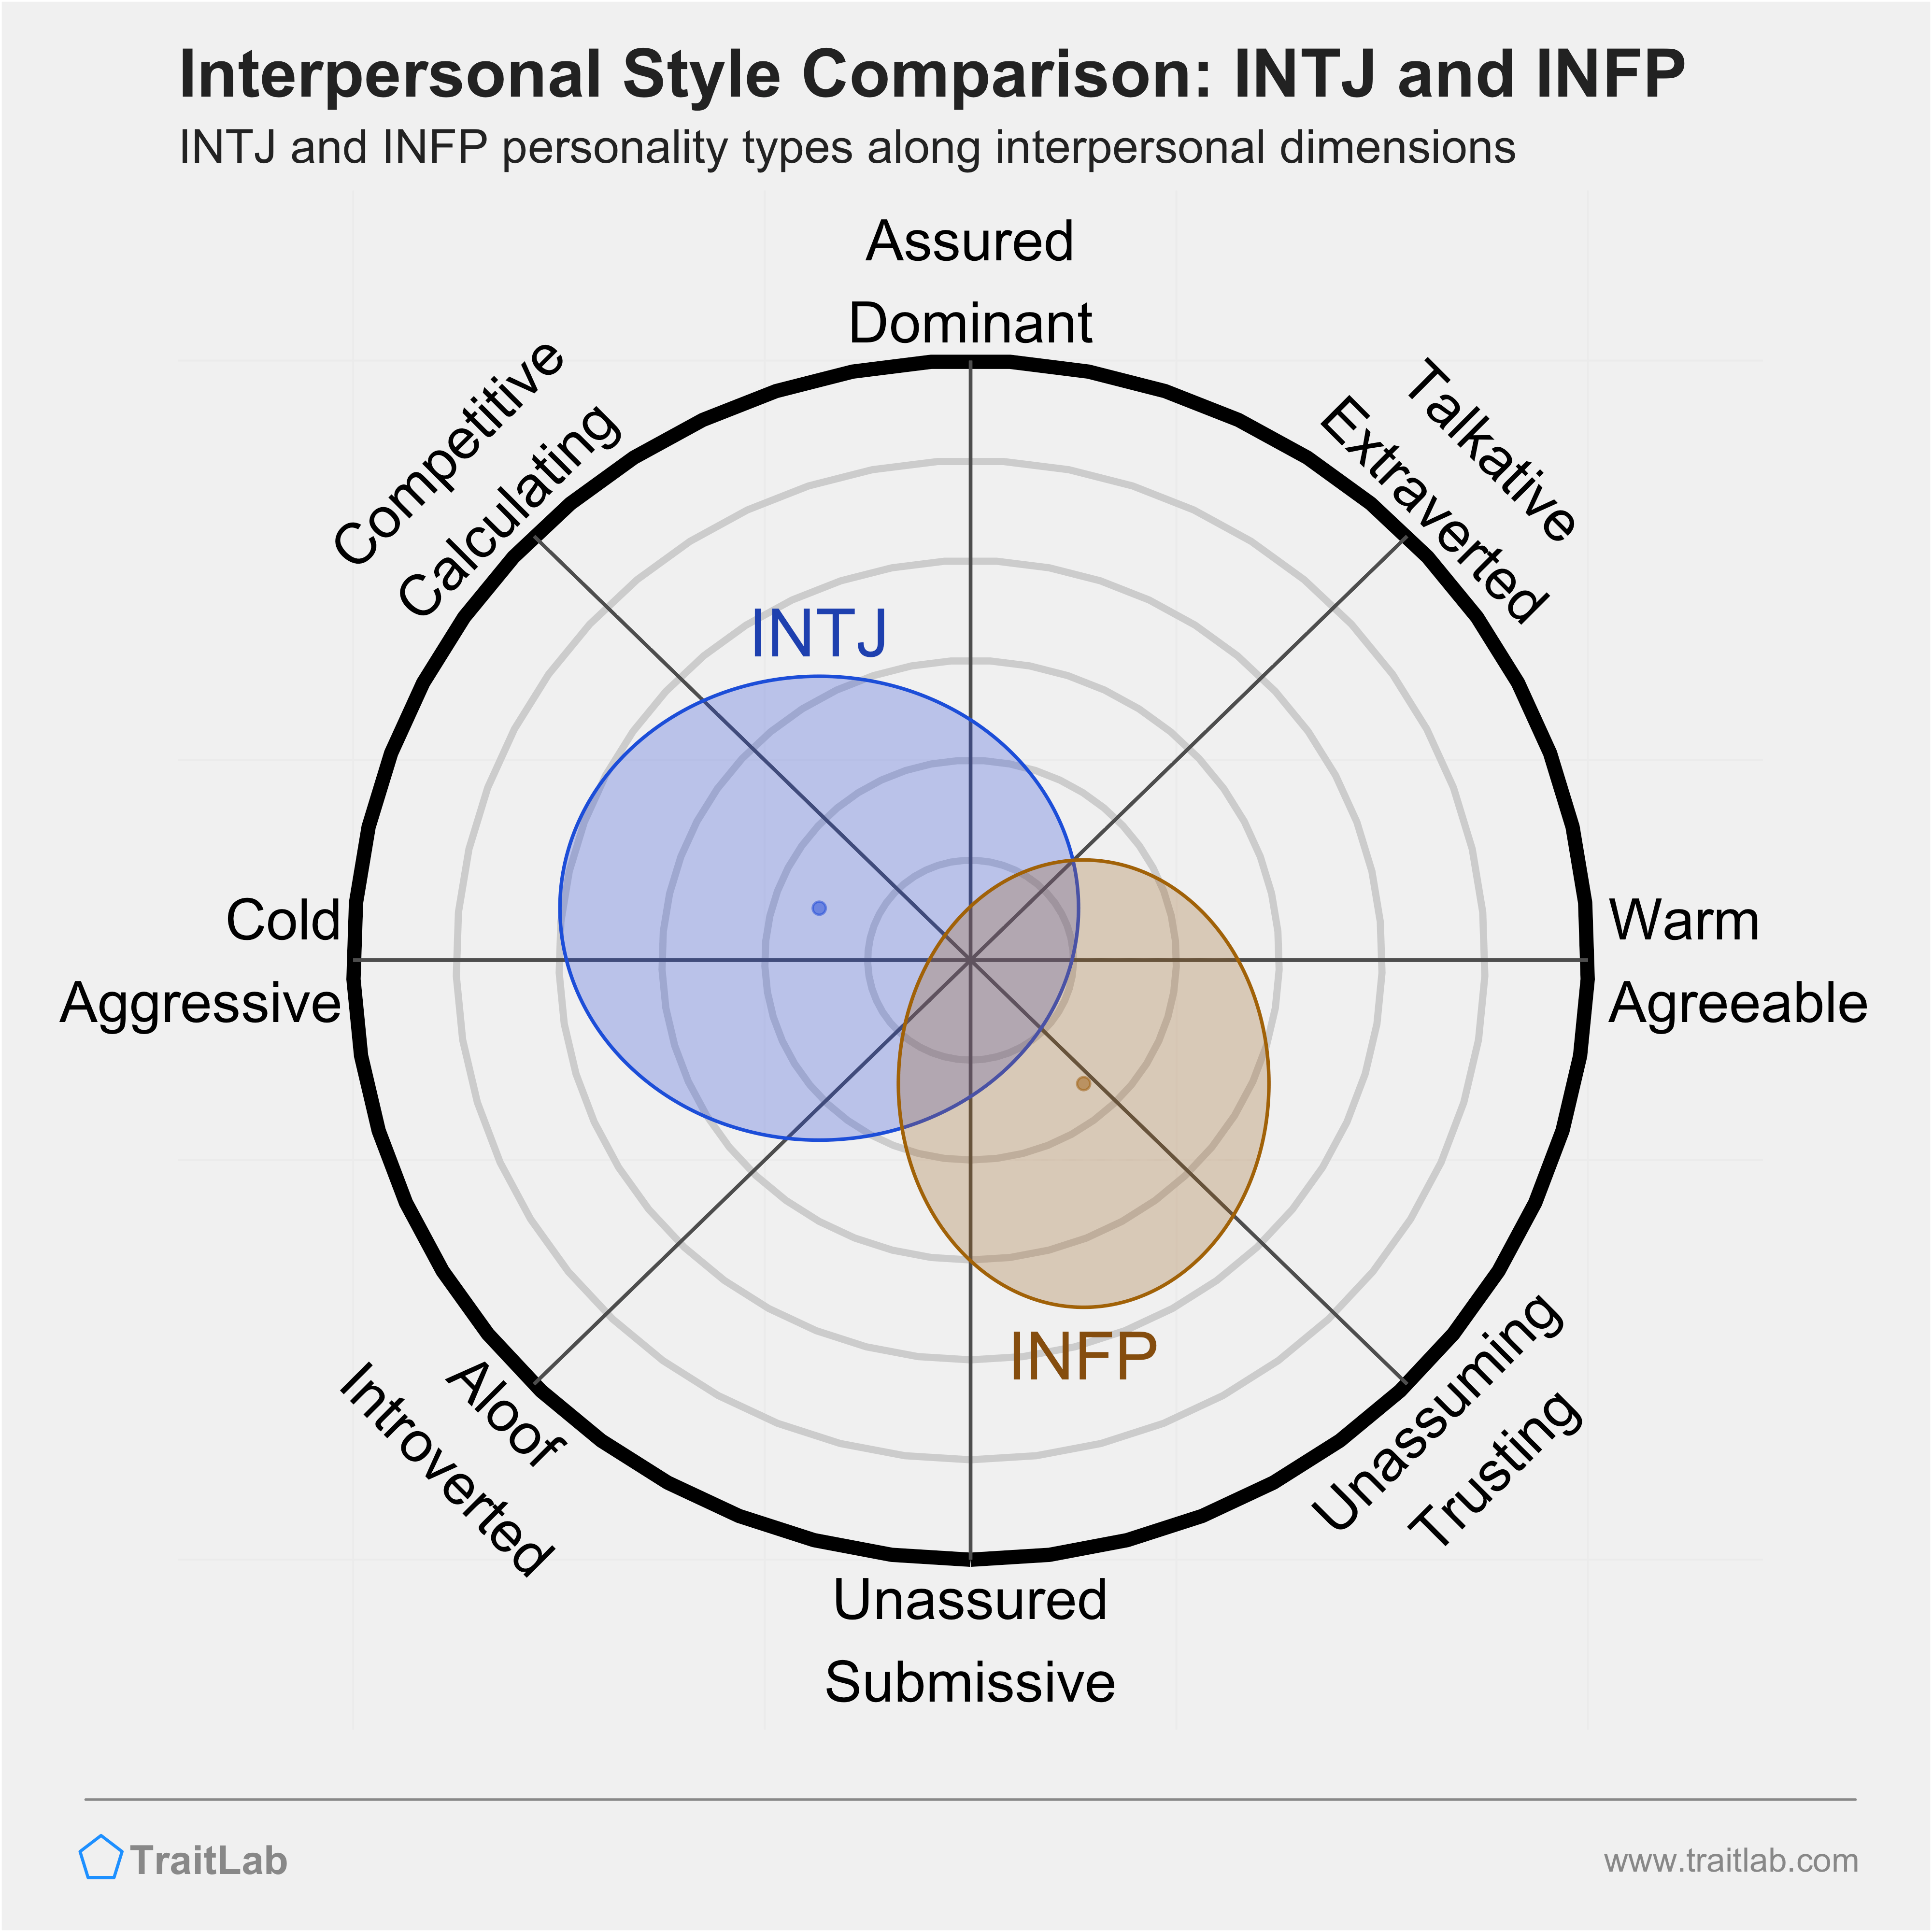 Are INTJ and INFP opposite?